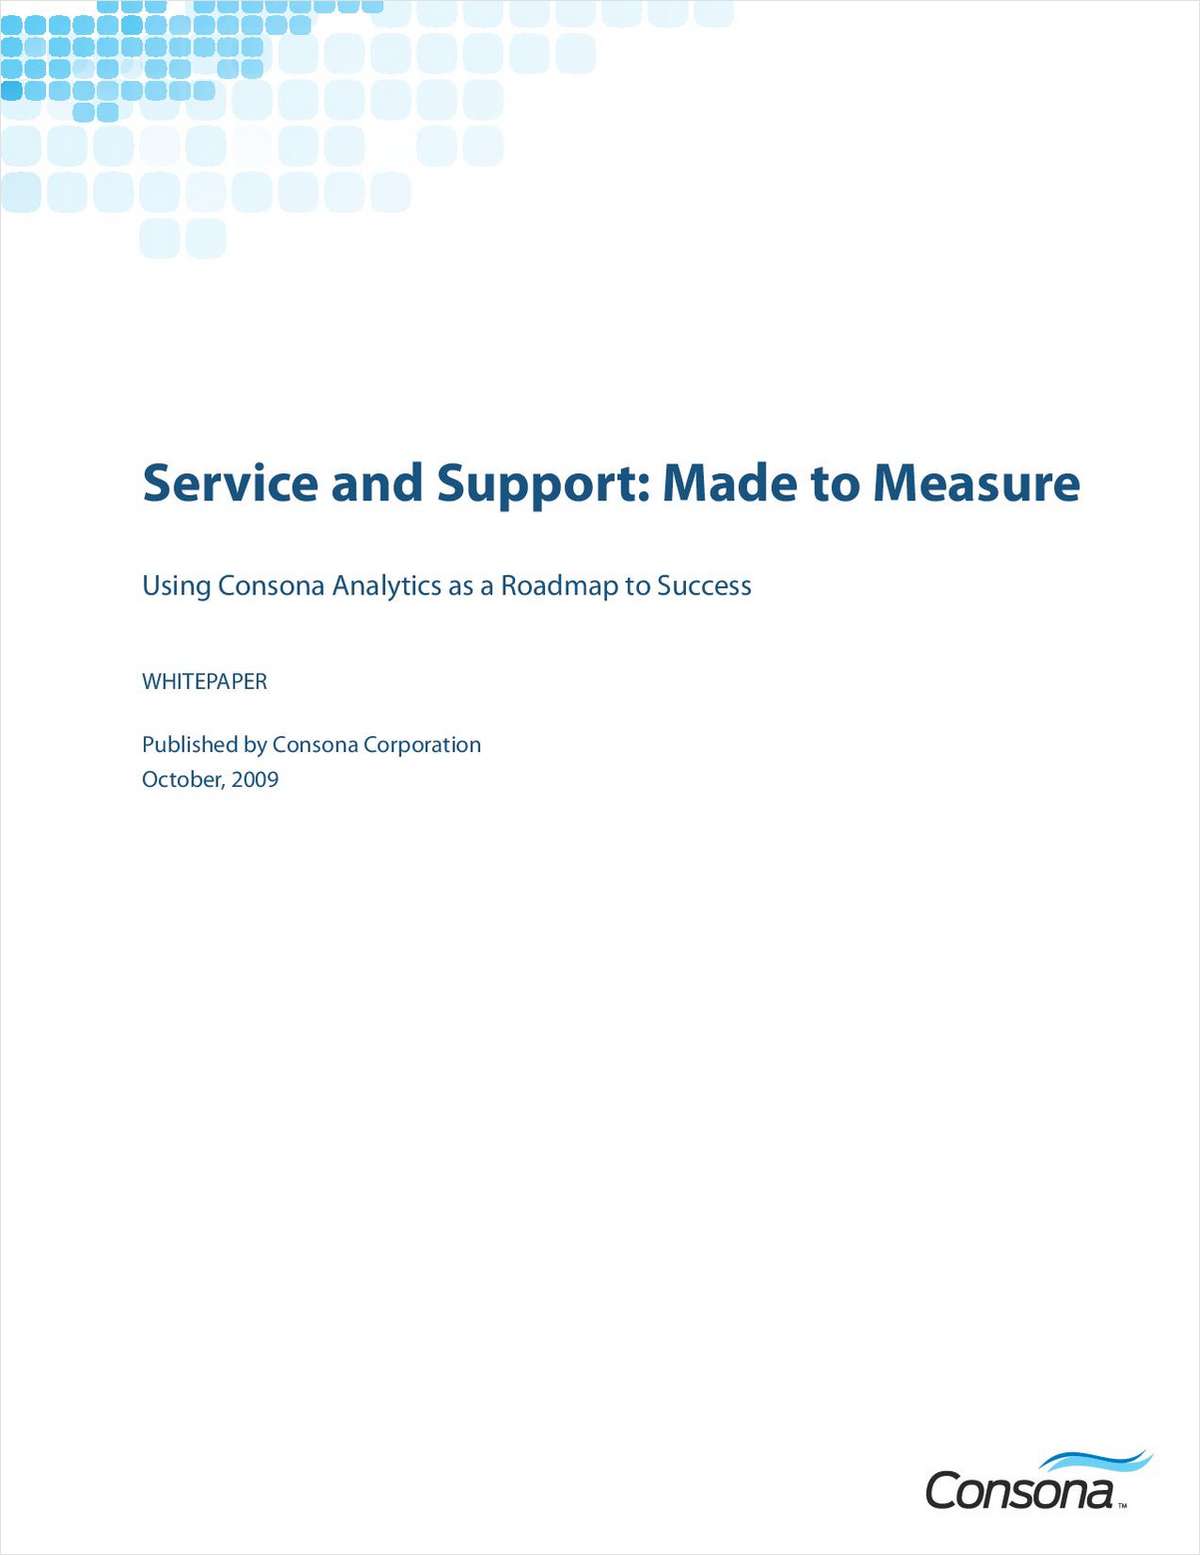 High Tech Customer Service and Support: Using Analytics to Build a Roadmap to Success